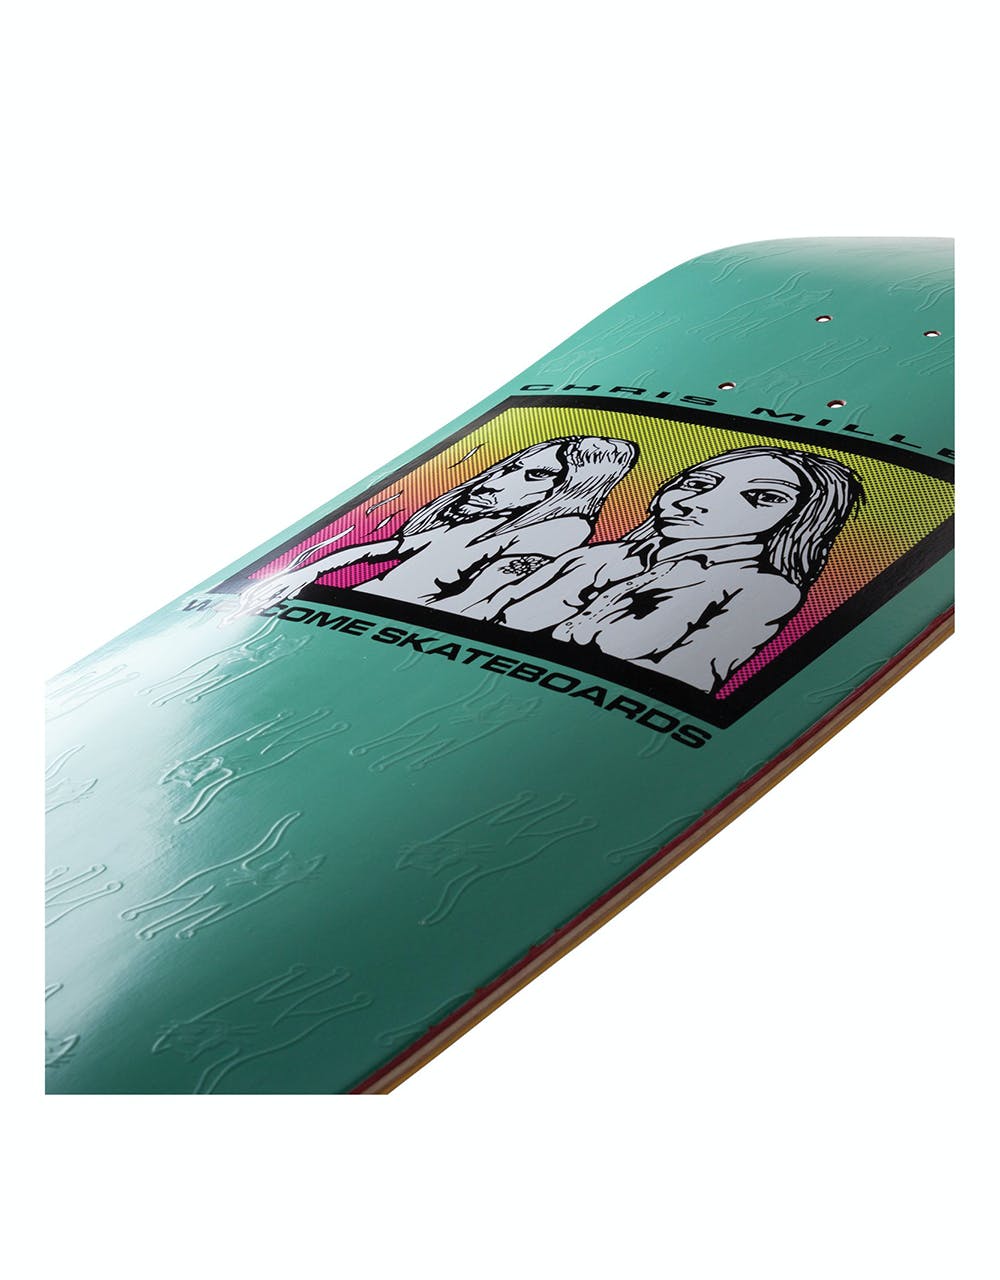 Welcome Miller The Couple on Catblood 2.0 Skateboard Deck - 8.75"